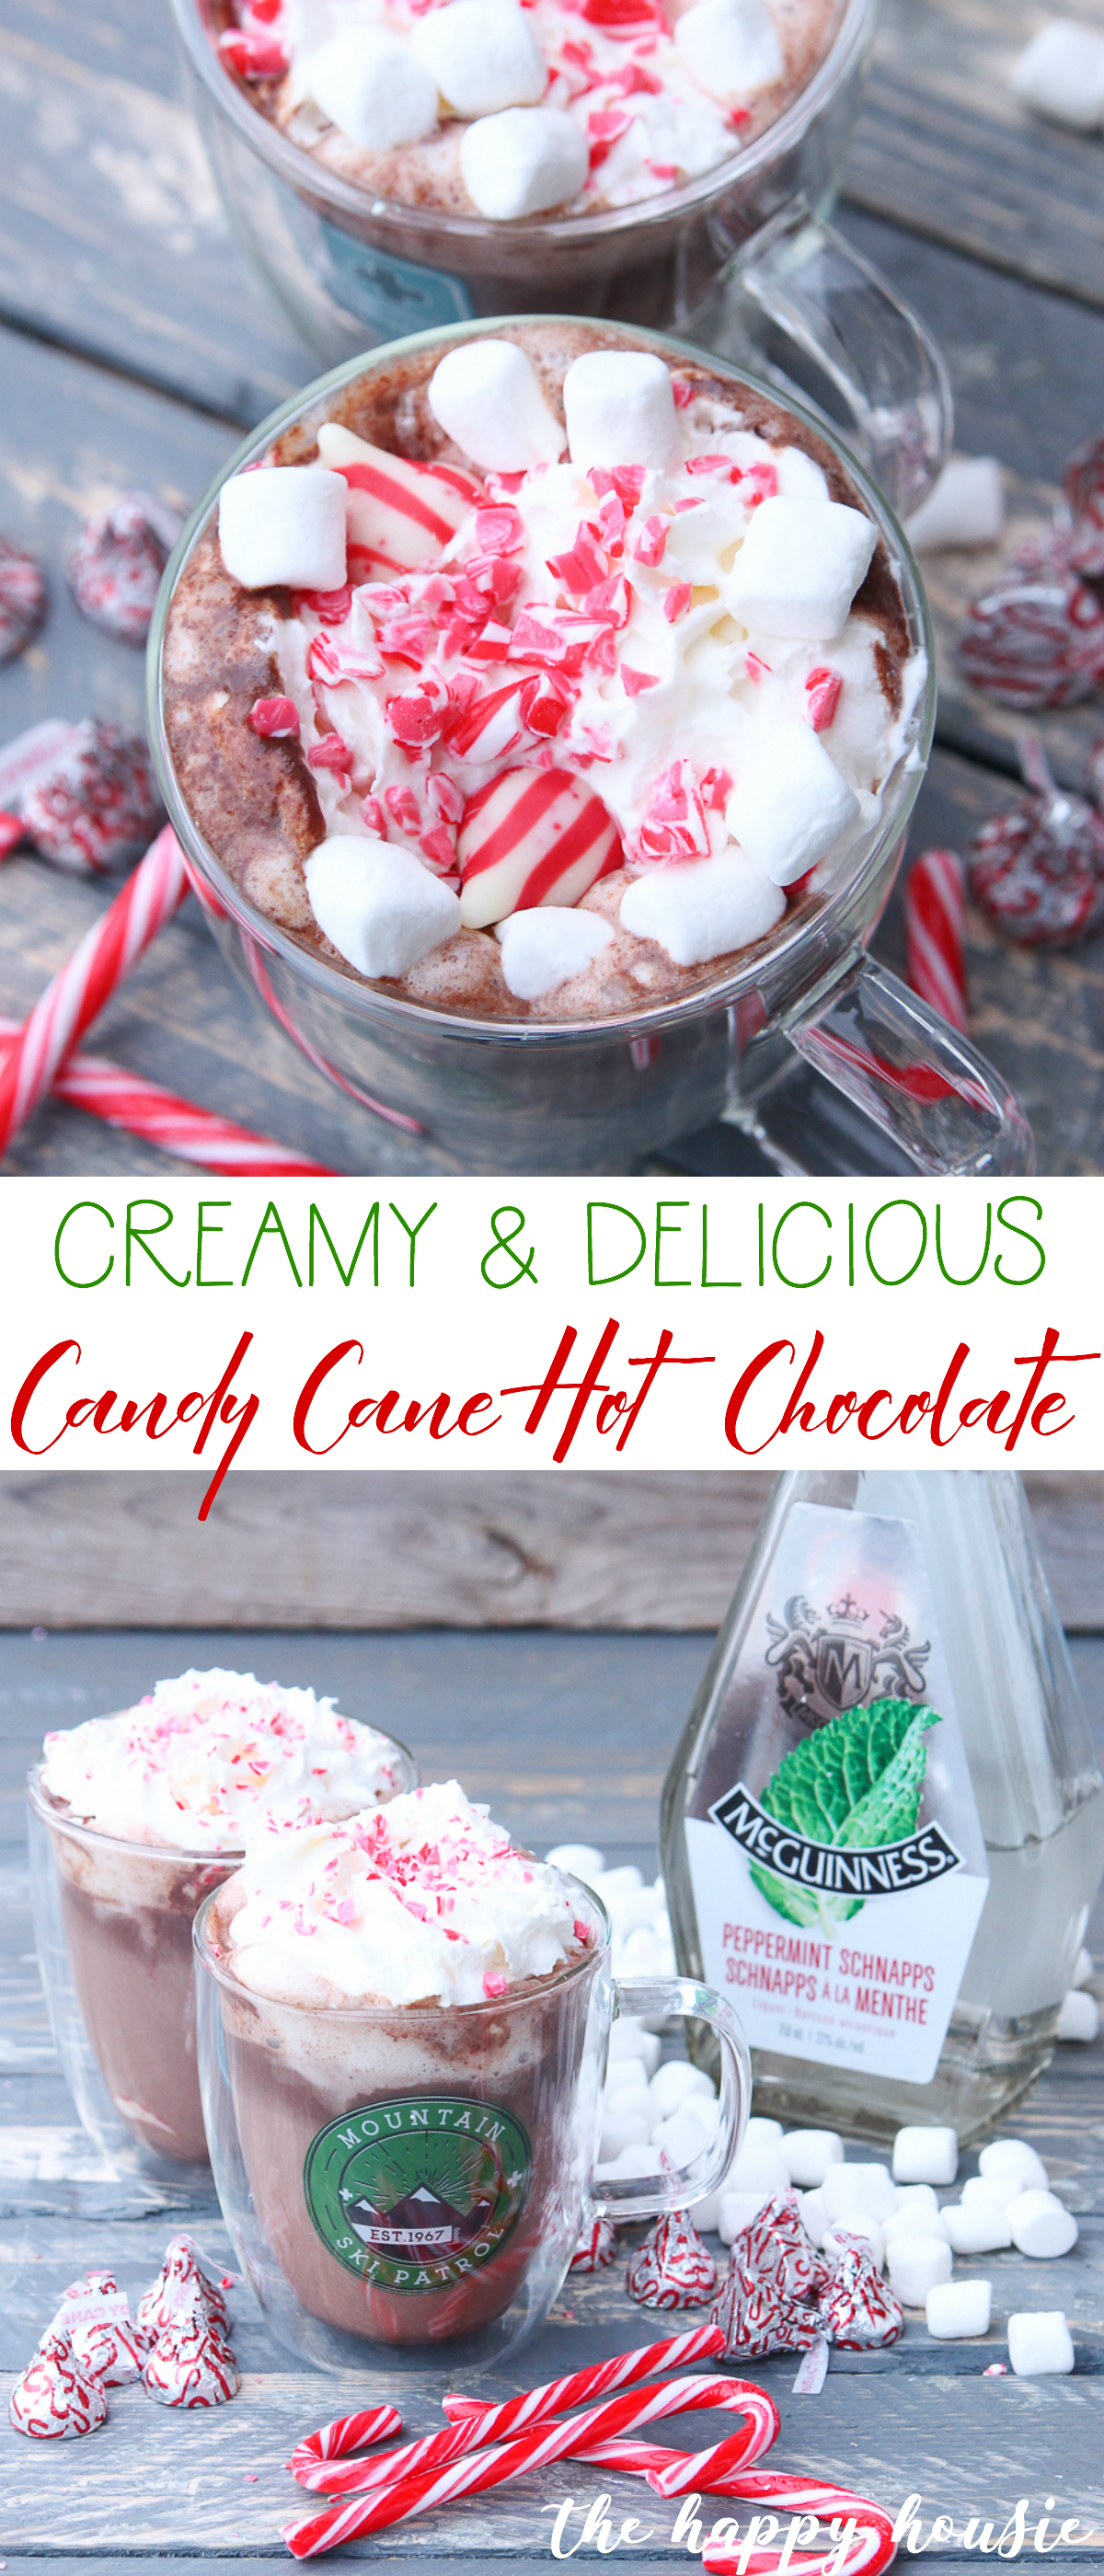 Cups of creamy & delicious candy cane hot chocolate poster.